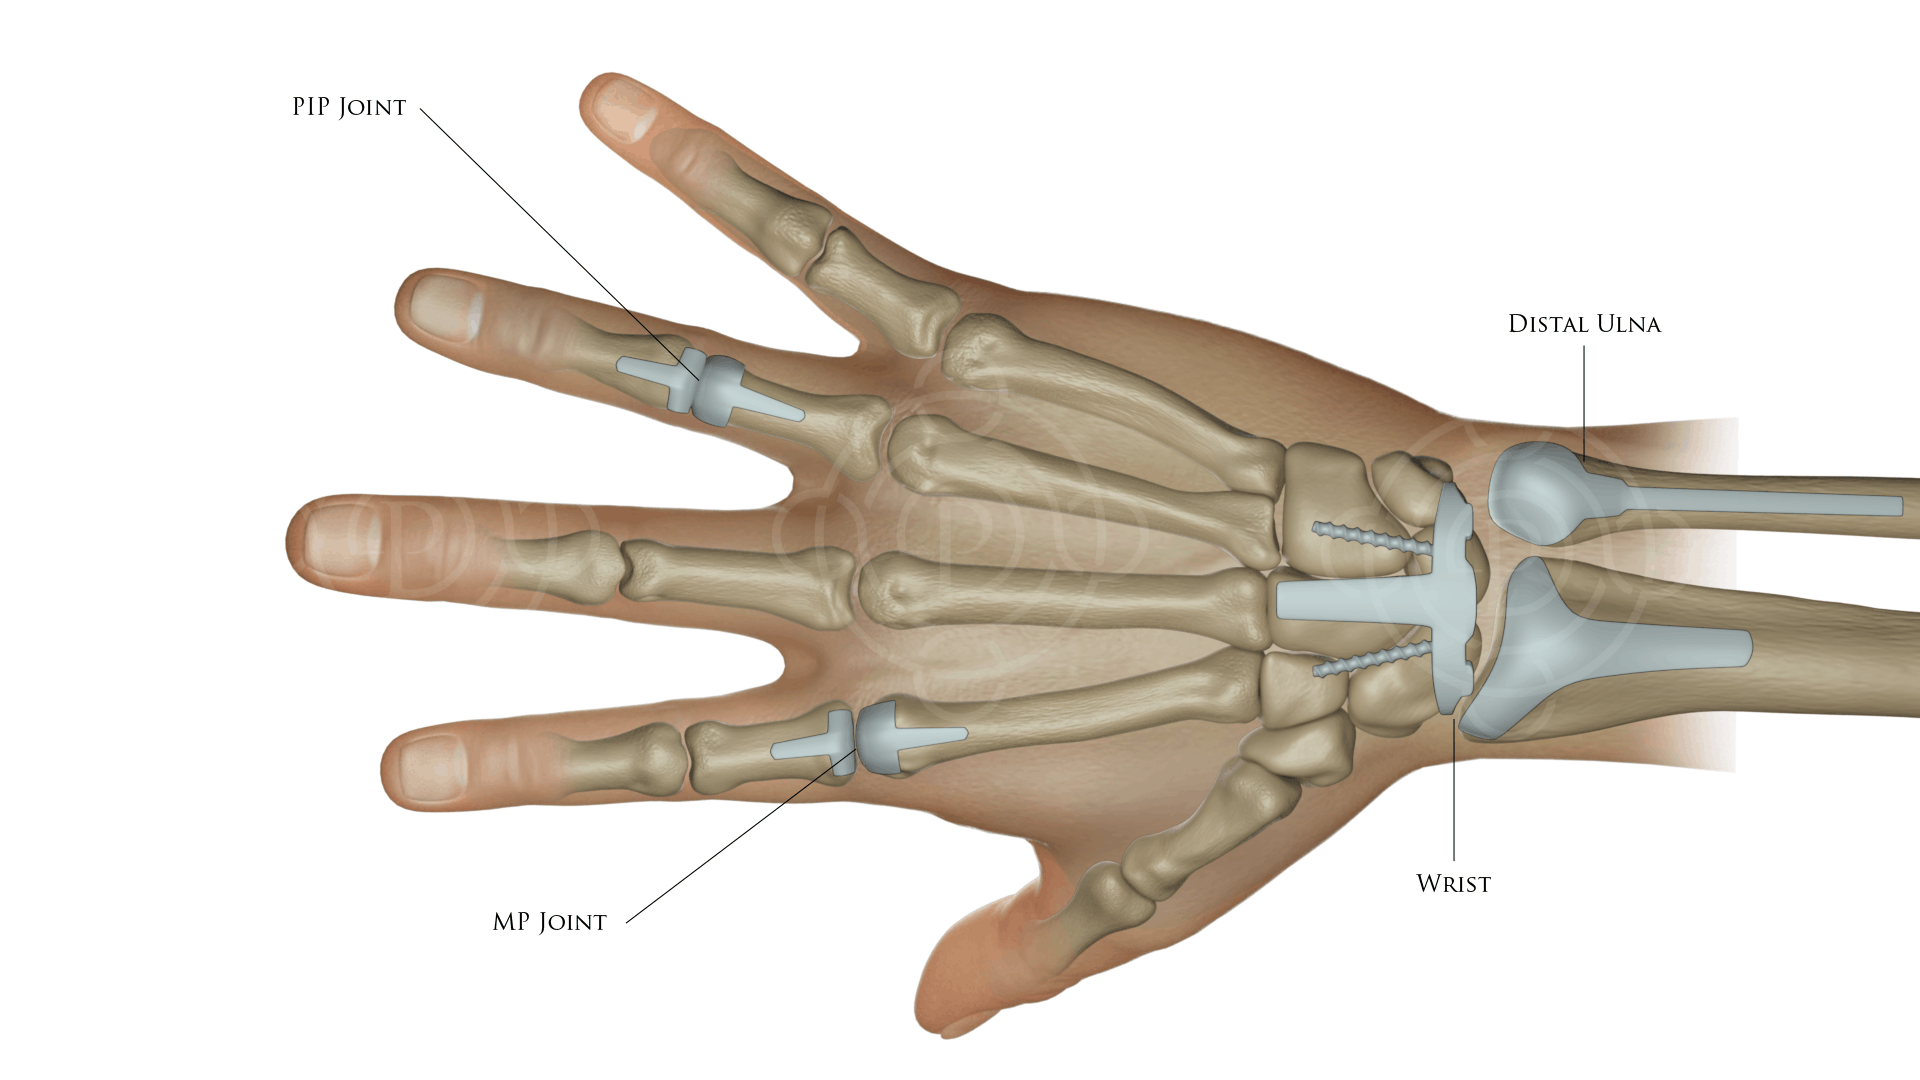 PIP Joint, MP Joint, Distal Ulna, Wrist